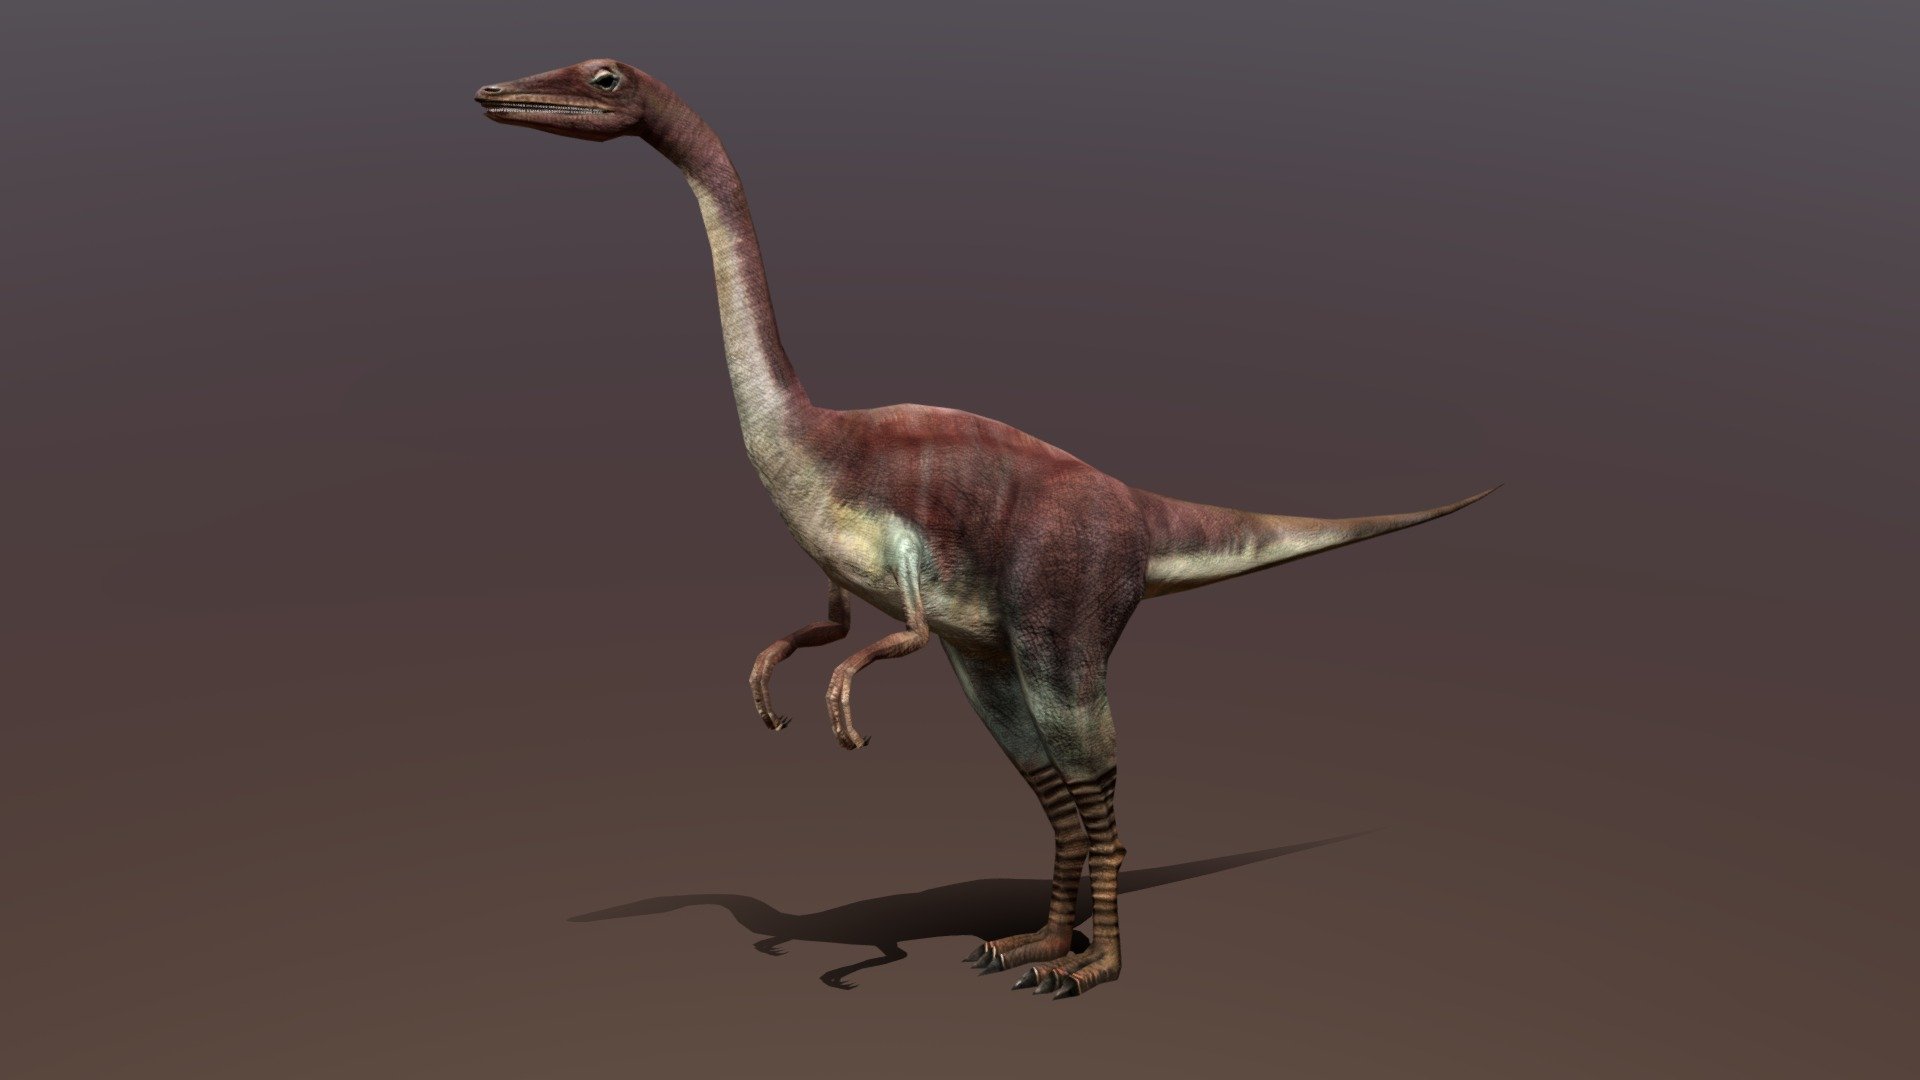 The tiny Compsognathus dinosaur is on the run - 3d render, special shaders  were used to create